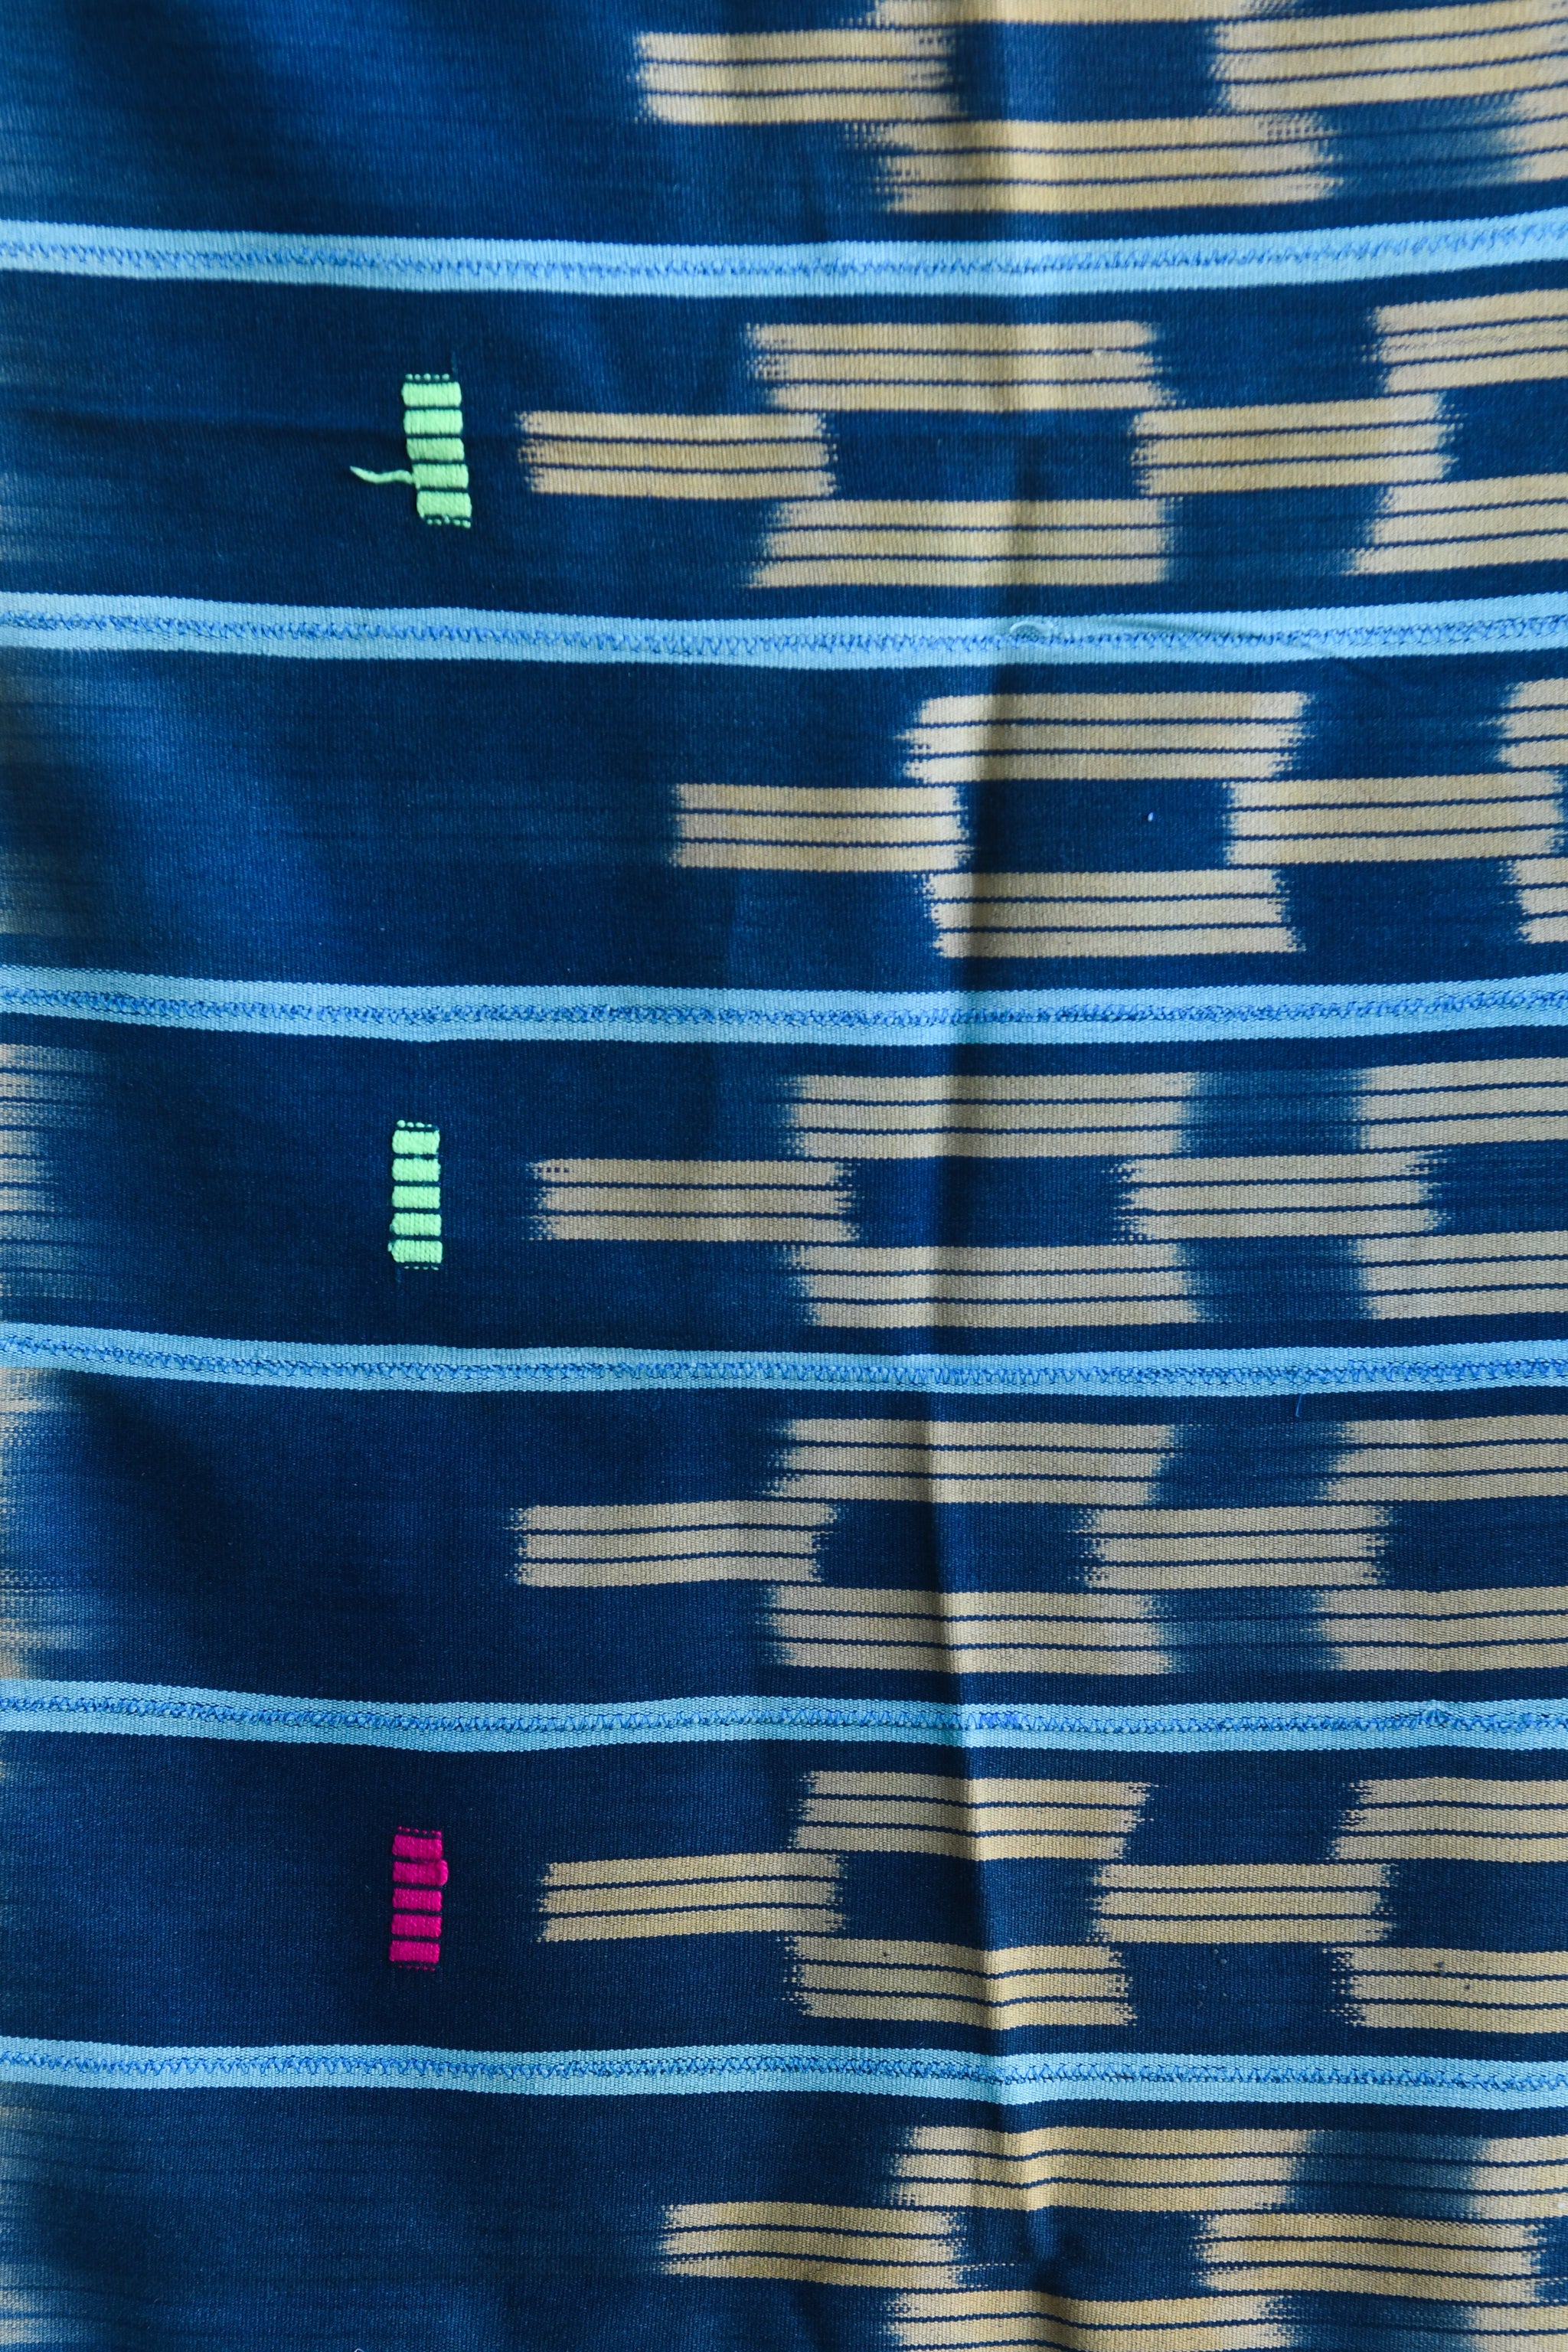 Handcrafted Textiles - Artisan Designed - Handcrafted African Art Textiles - Home Decor - Living Spaces - Mix Colors - Bold Patterns - Traditional Designs - African Culture - This Indigo Tie Dyed Ikat Fabric is crafted from an African cotton textile, inspired by a vintage Baule design. Length: 55 inches Width: 41 inches